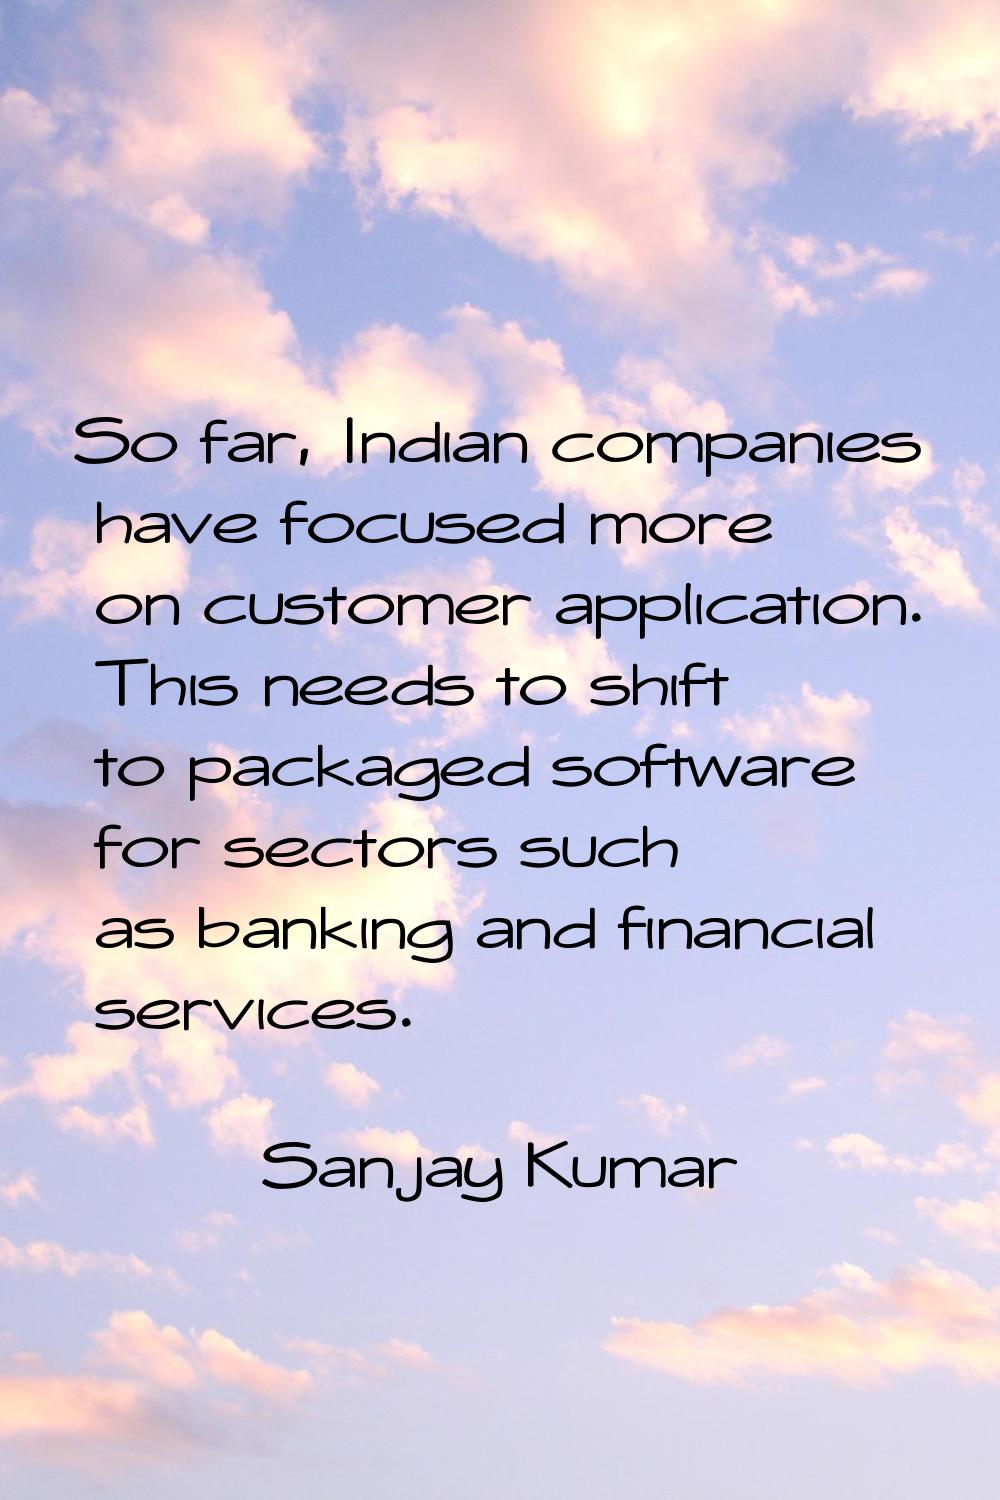 So far, Indian companies have focused more on customer application. This needs to shift to packaged